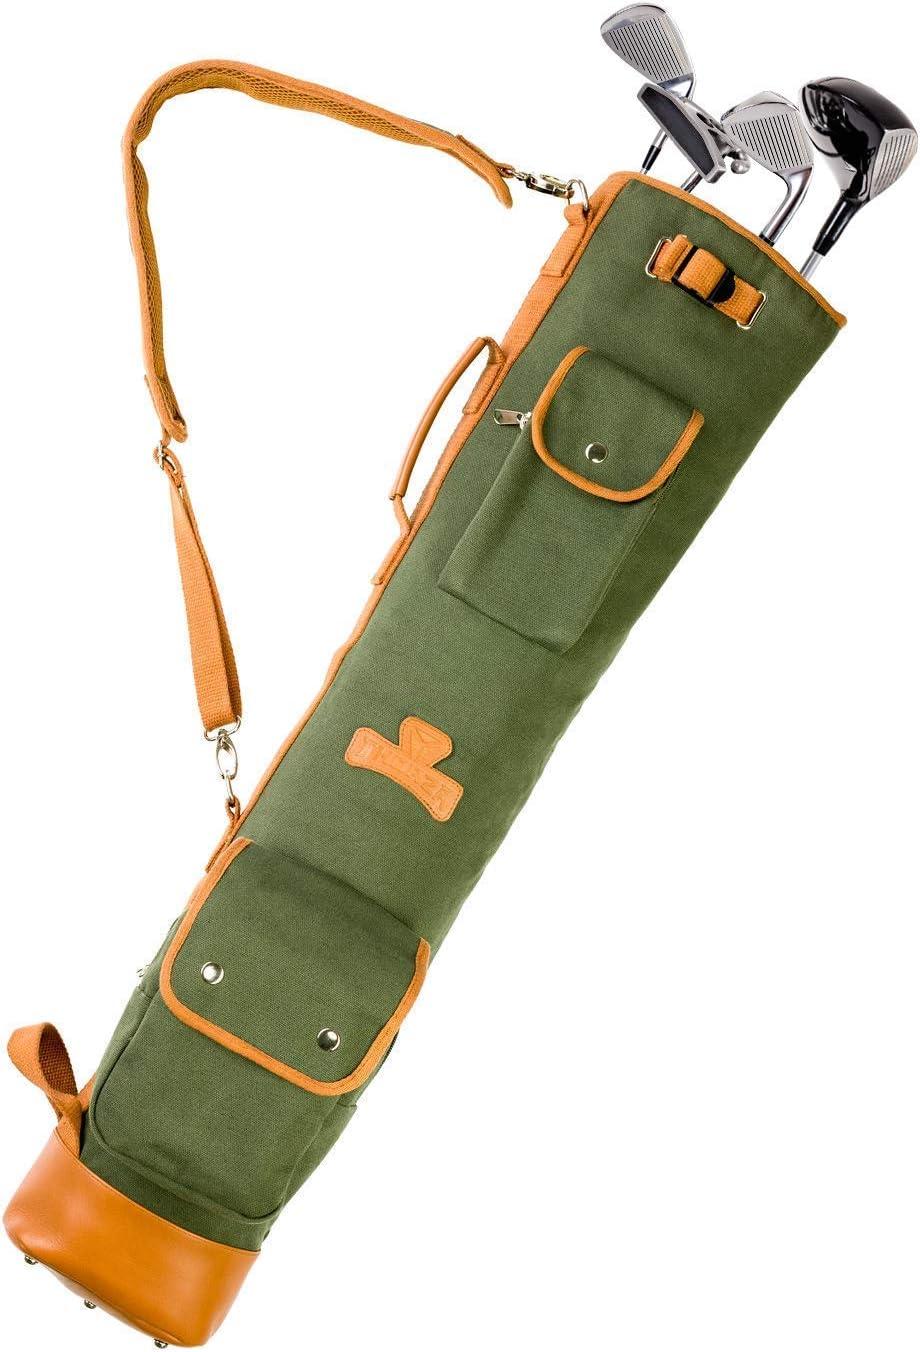 Thorza Sunday Golf Bag for Men and Women, Vintage Canvas and